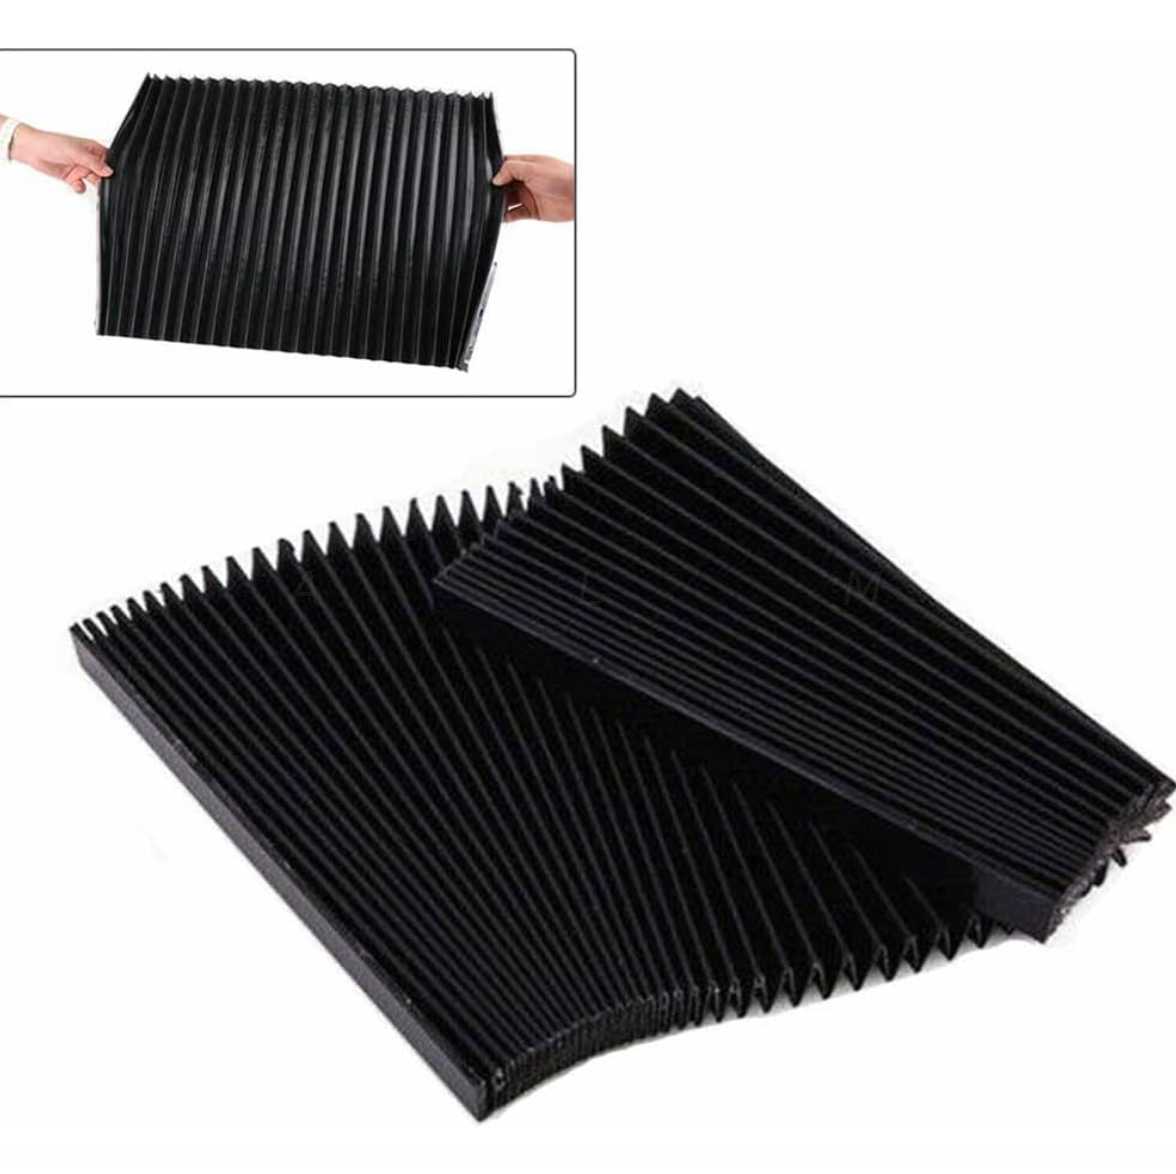  Waterproof Accordion Bellows Shield Protective Cover